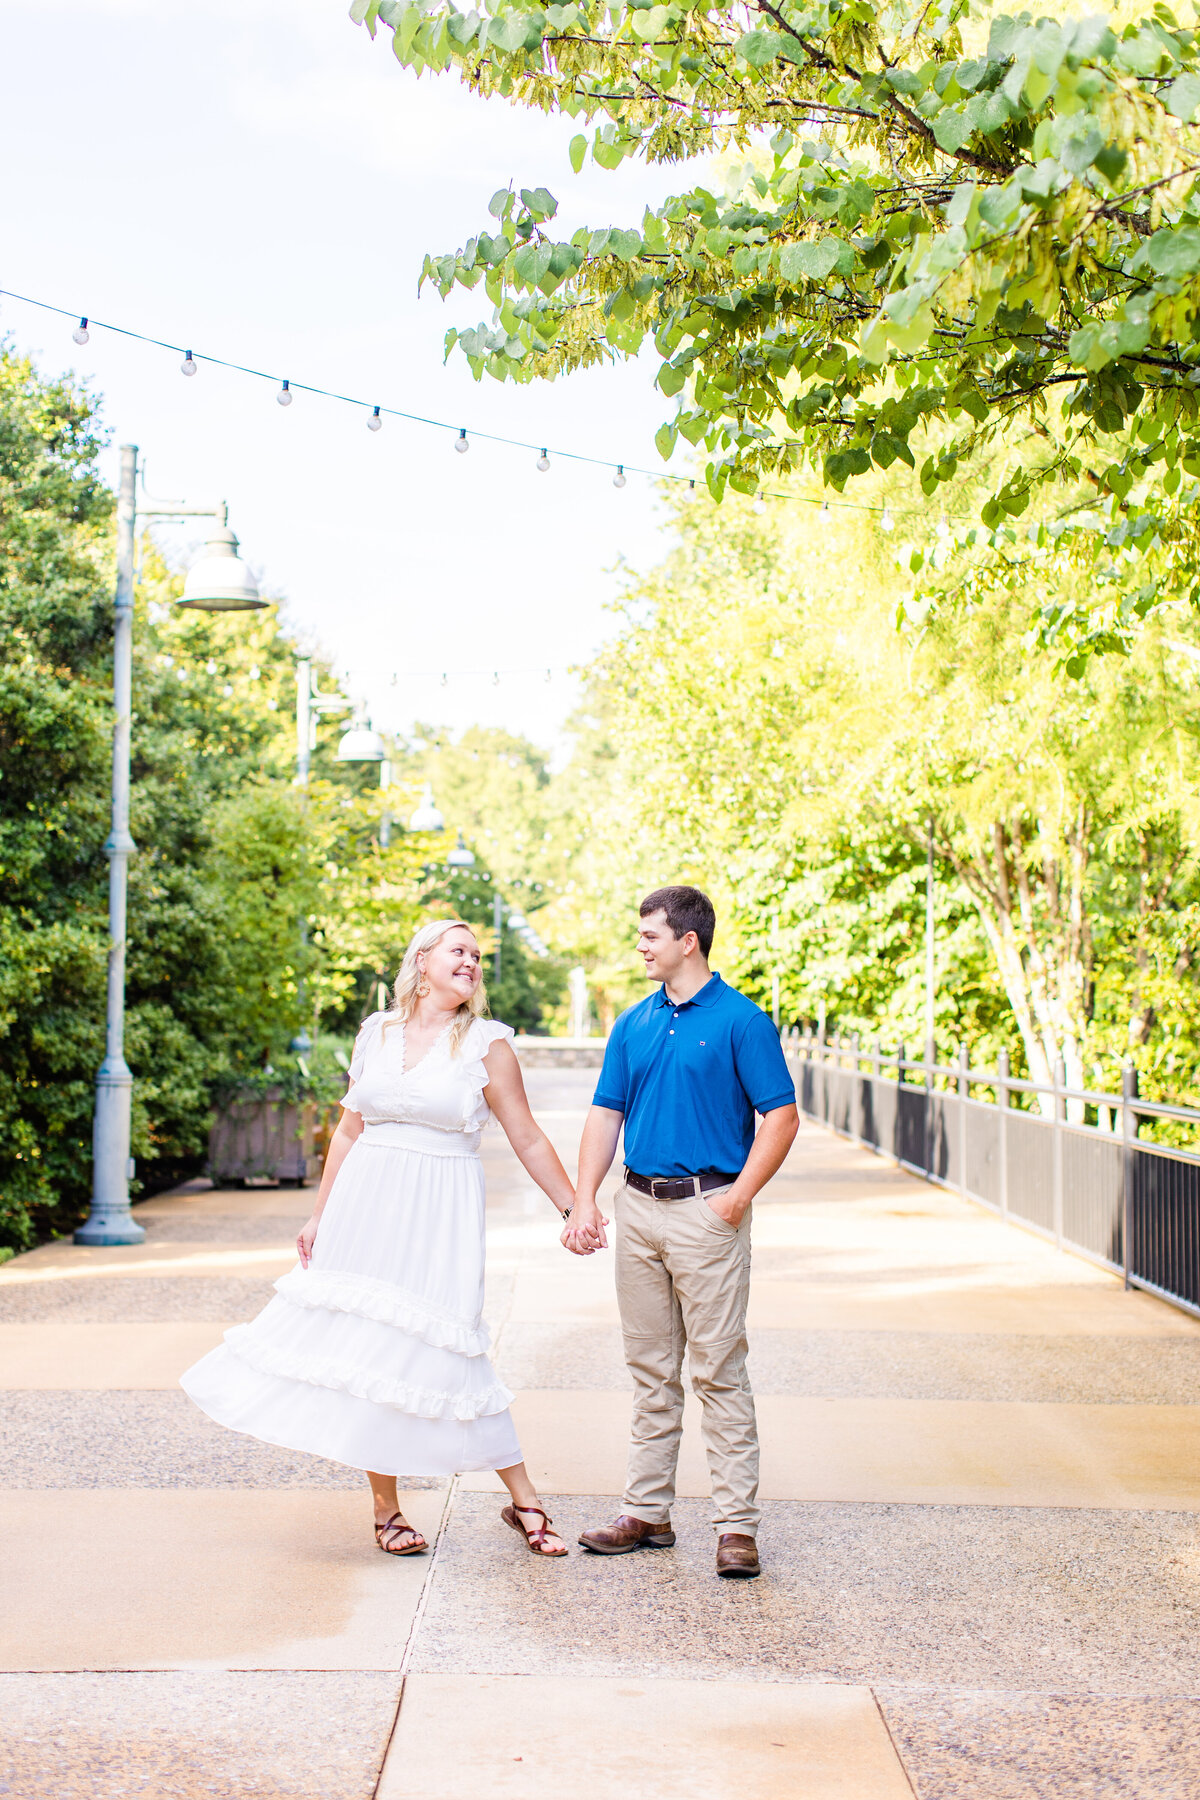 girl swinging white dress holding hands with her fiance